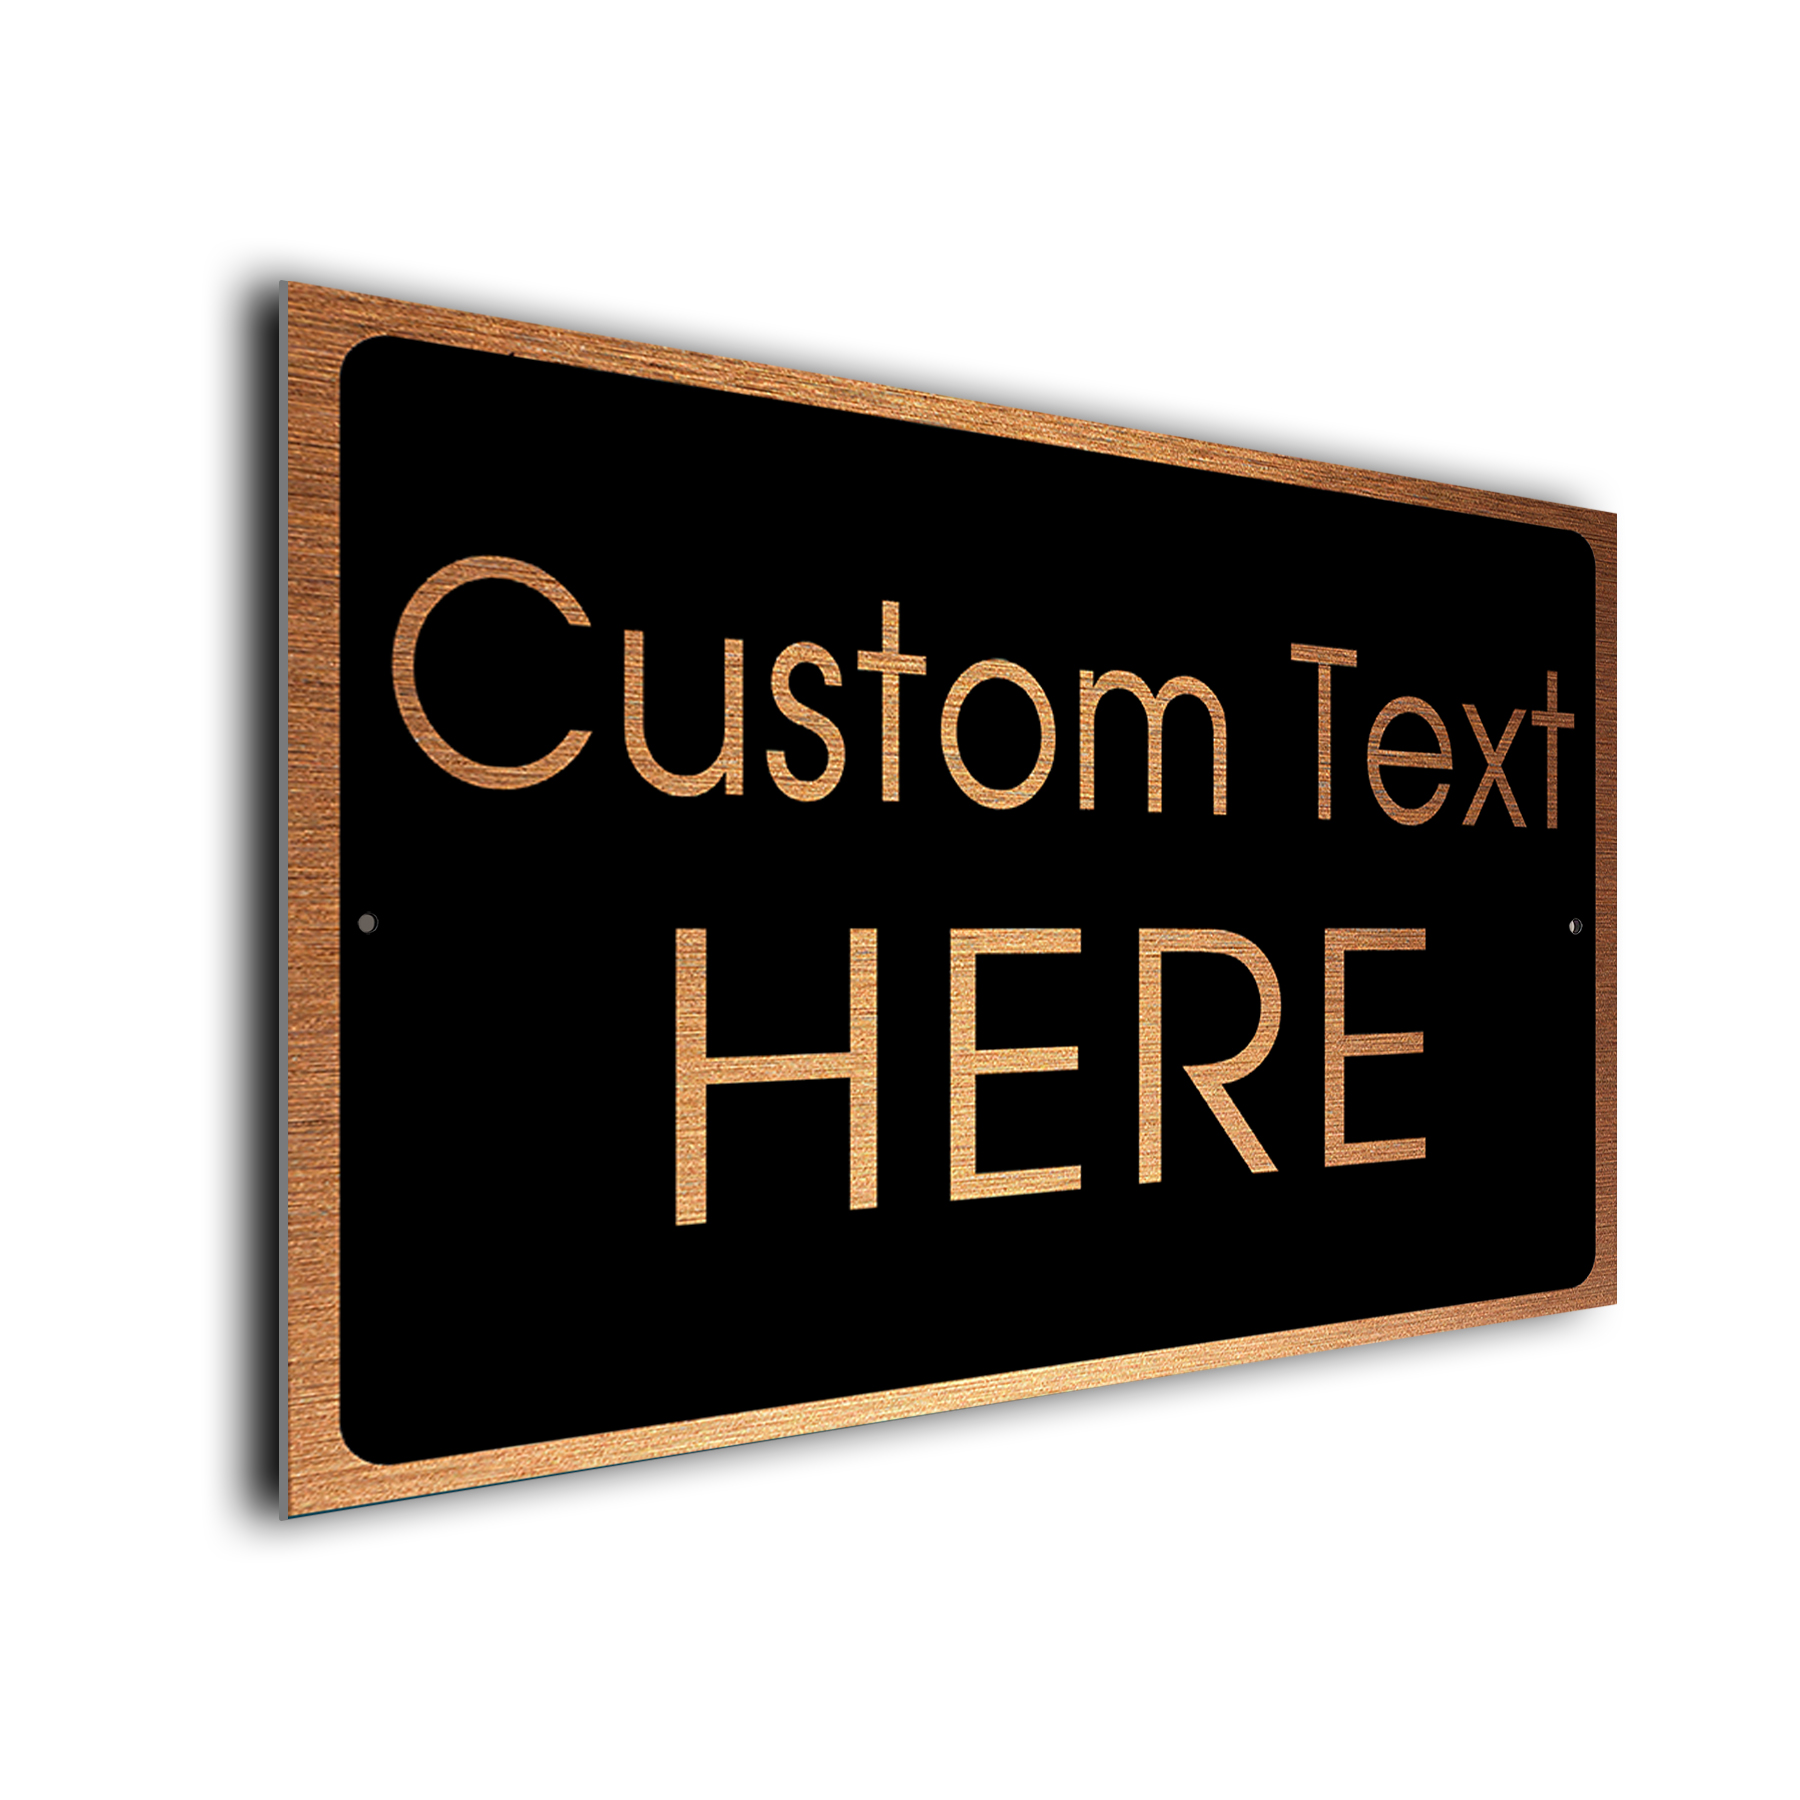 Personalized Custom Text signs